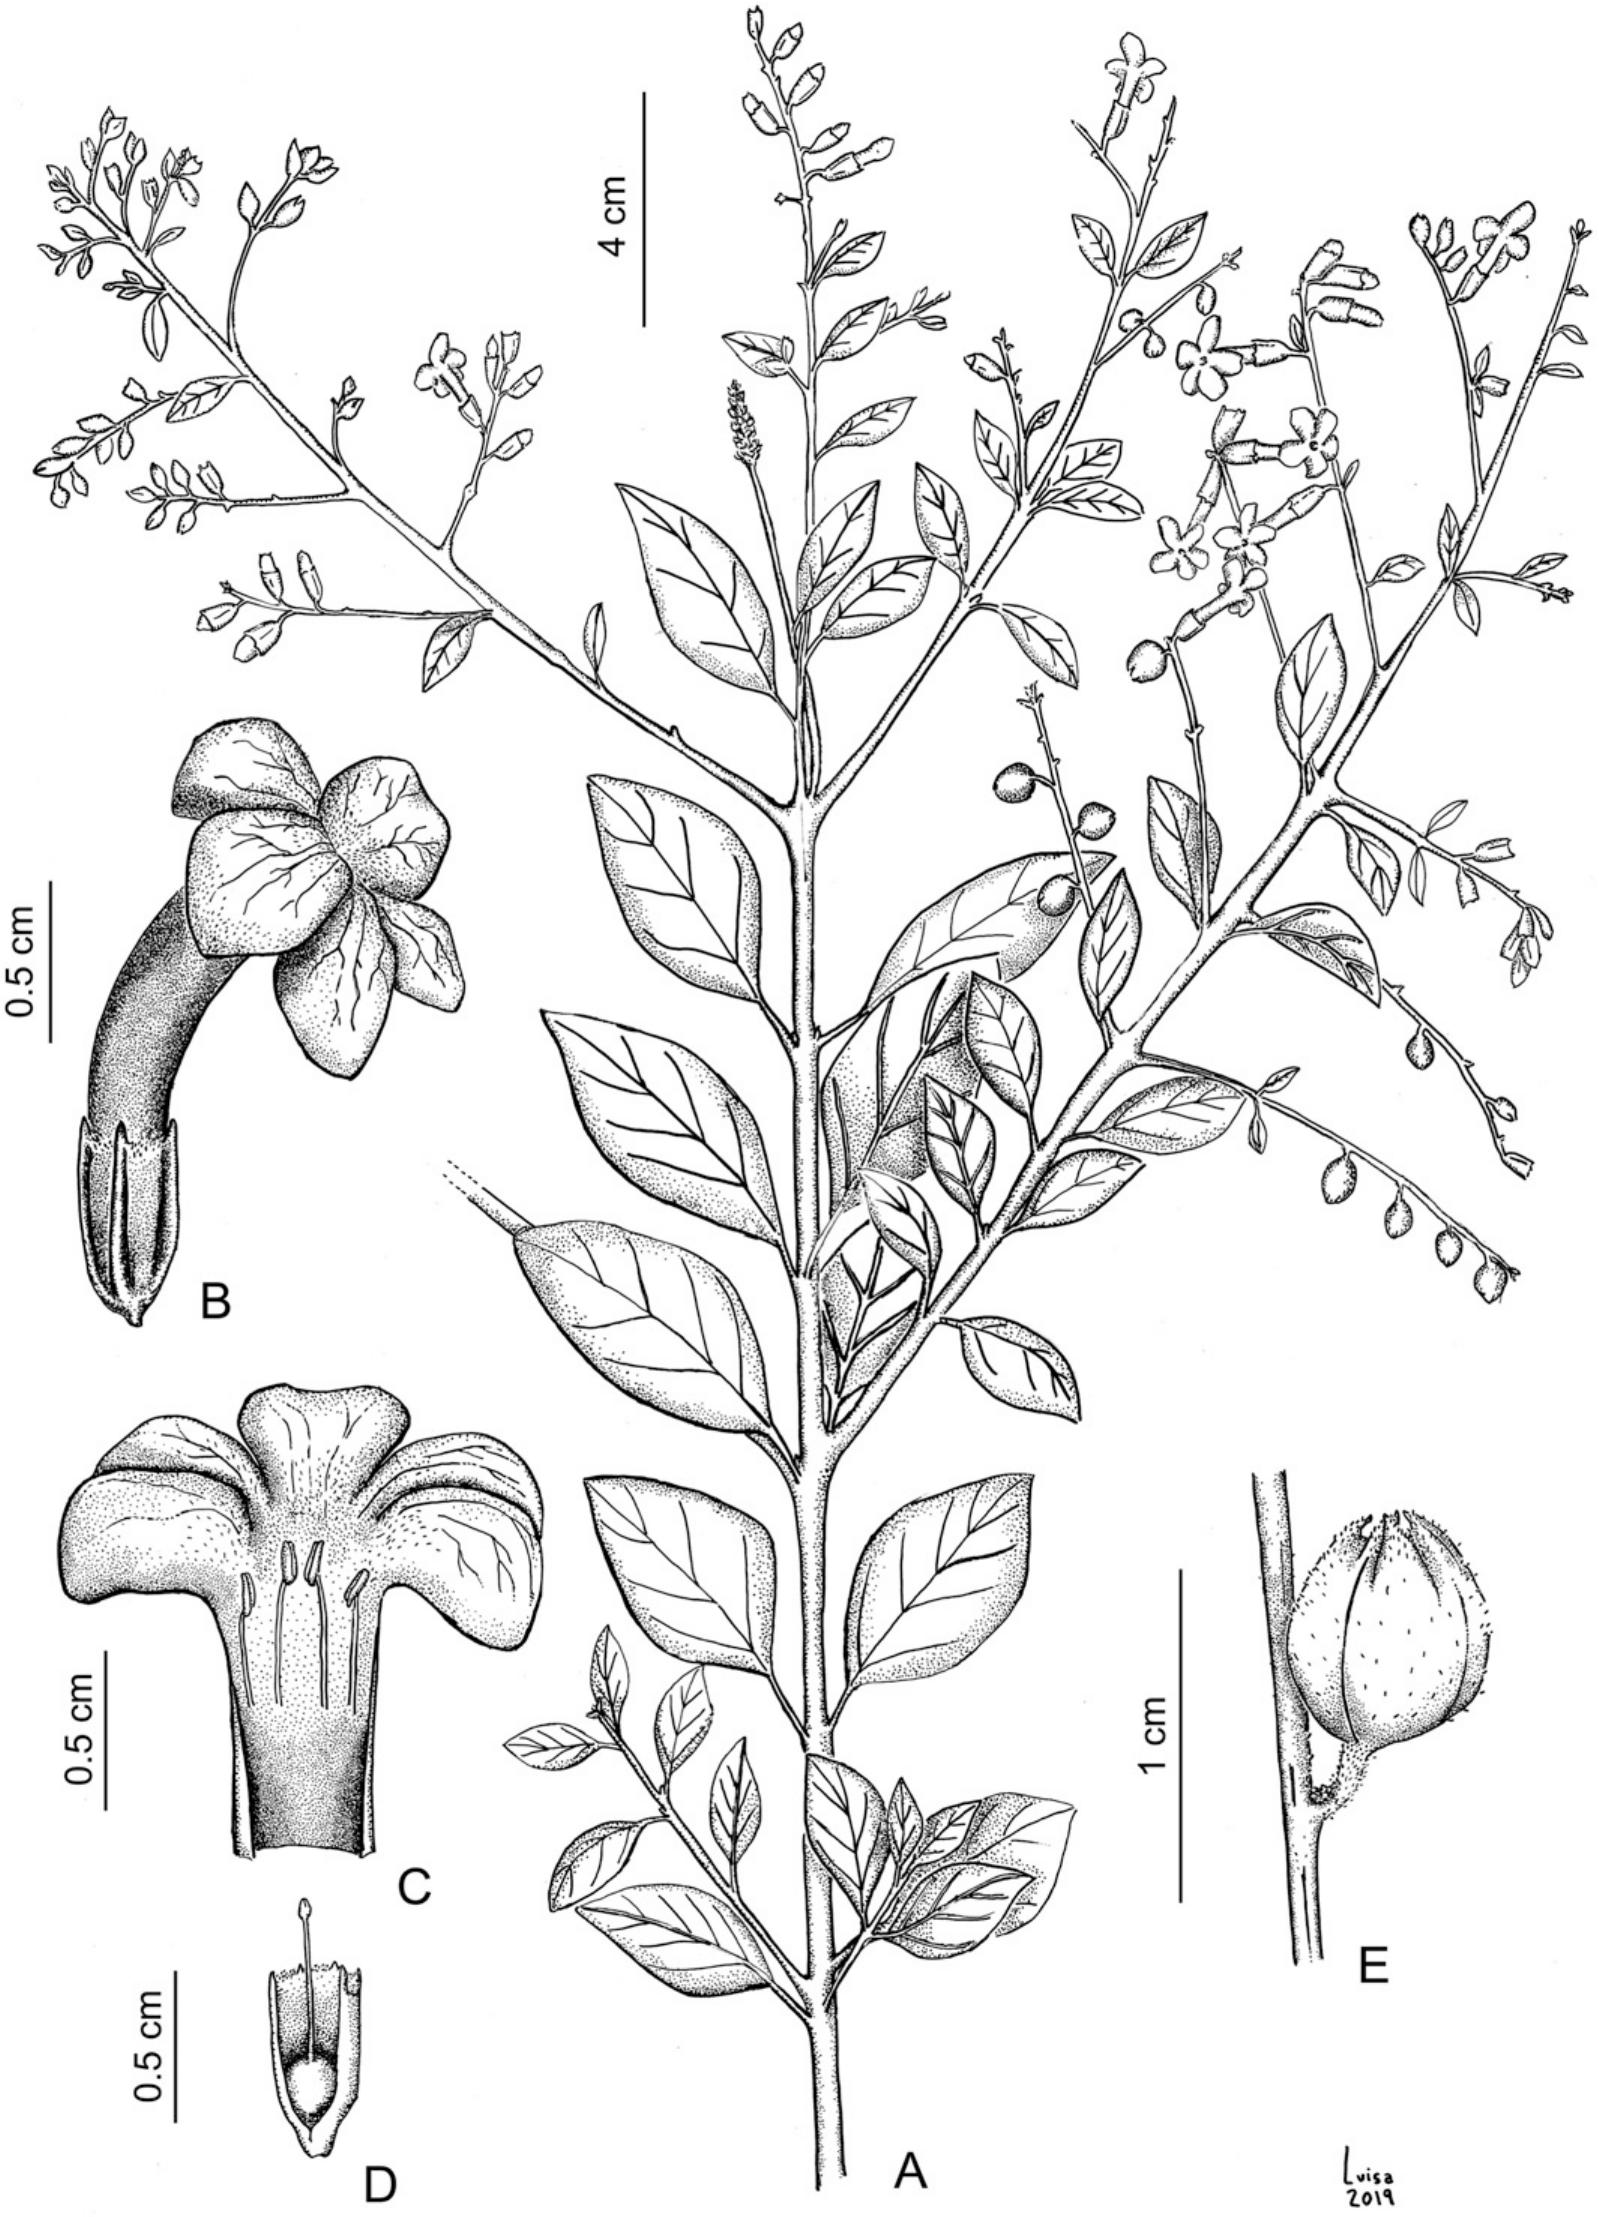 Insights Into The Systematics Of Tribe Duranteae Verbenaceae Ii A Taxonomic Revision Of The New World Genus Duranta1